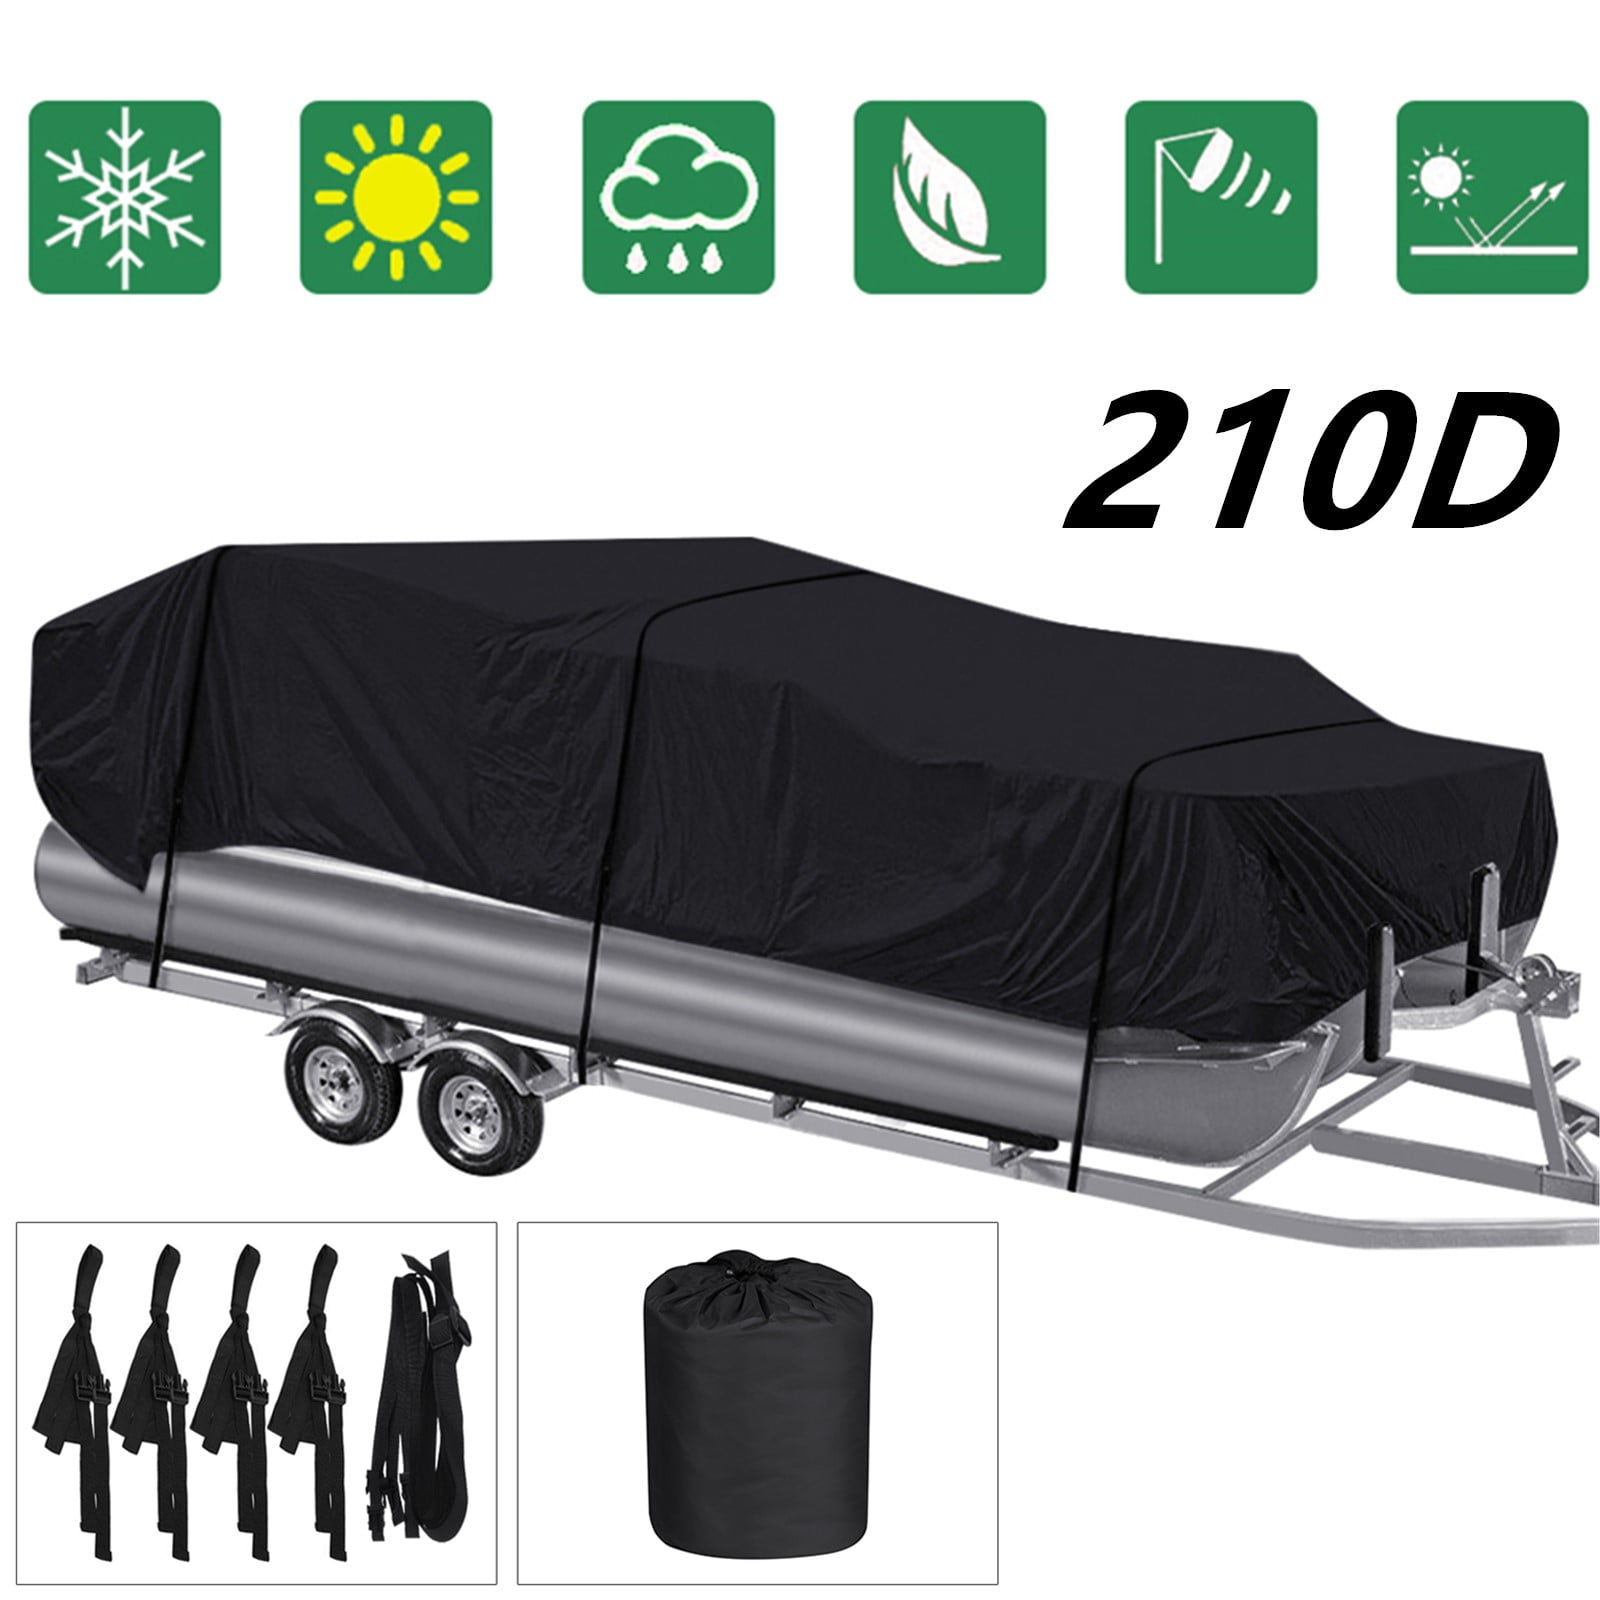 Maxiii Pontoon Boat Cover Waterproof All Weather Protecter UV-Rays Dust Resistant Protection Non-Abrasive Lining Heavy Duty 210D Fabric Cover